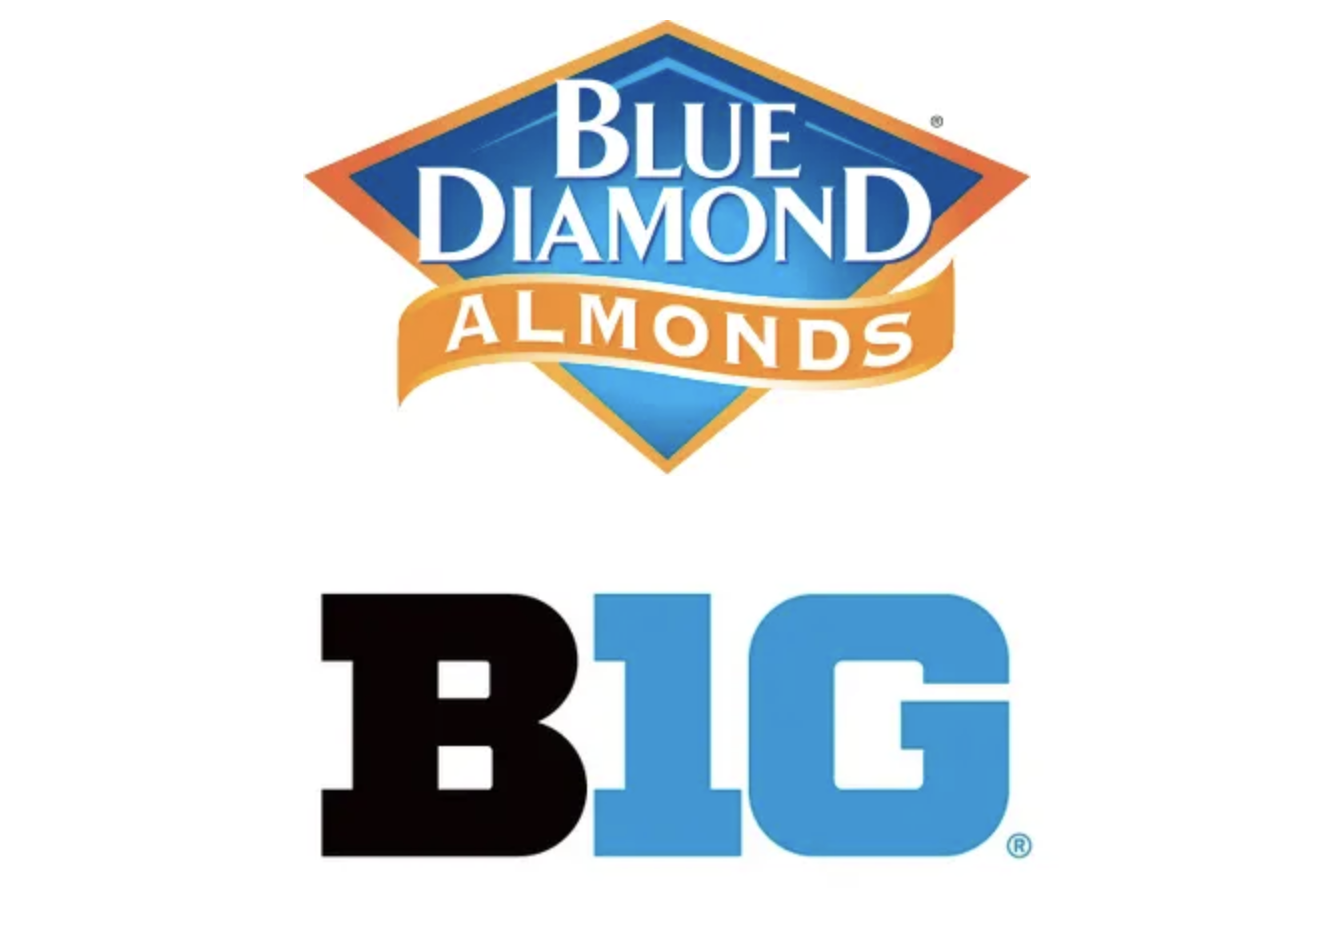 Big Ten Conference Picks Blue Diamond As Official Snack